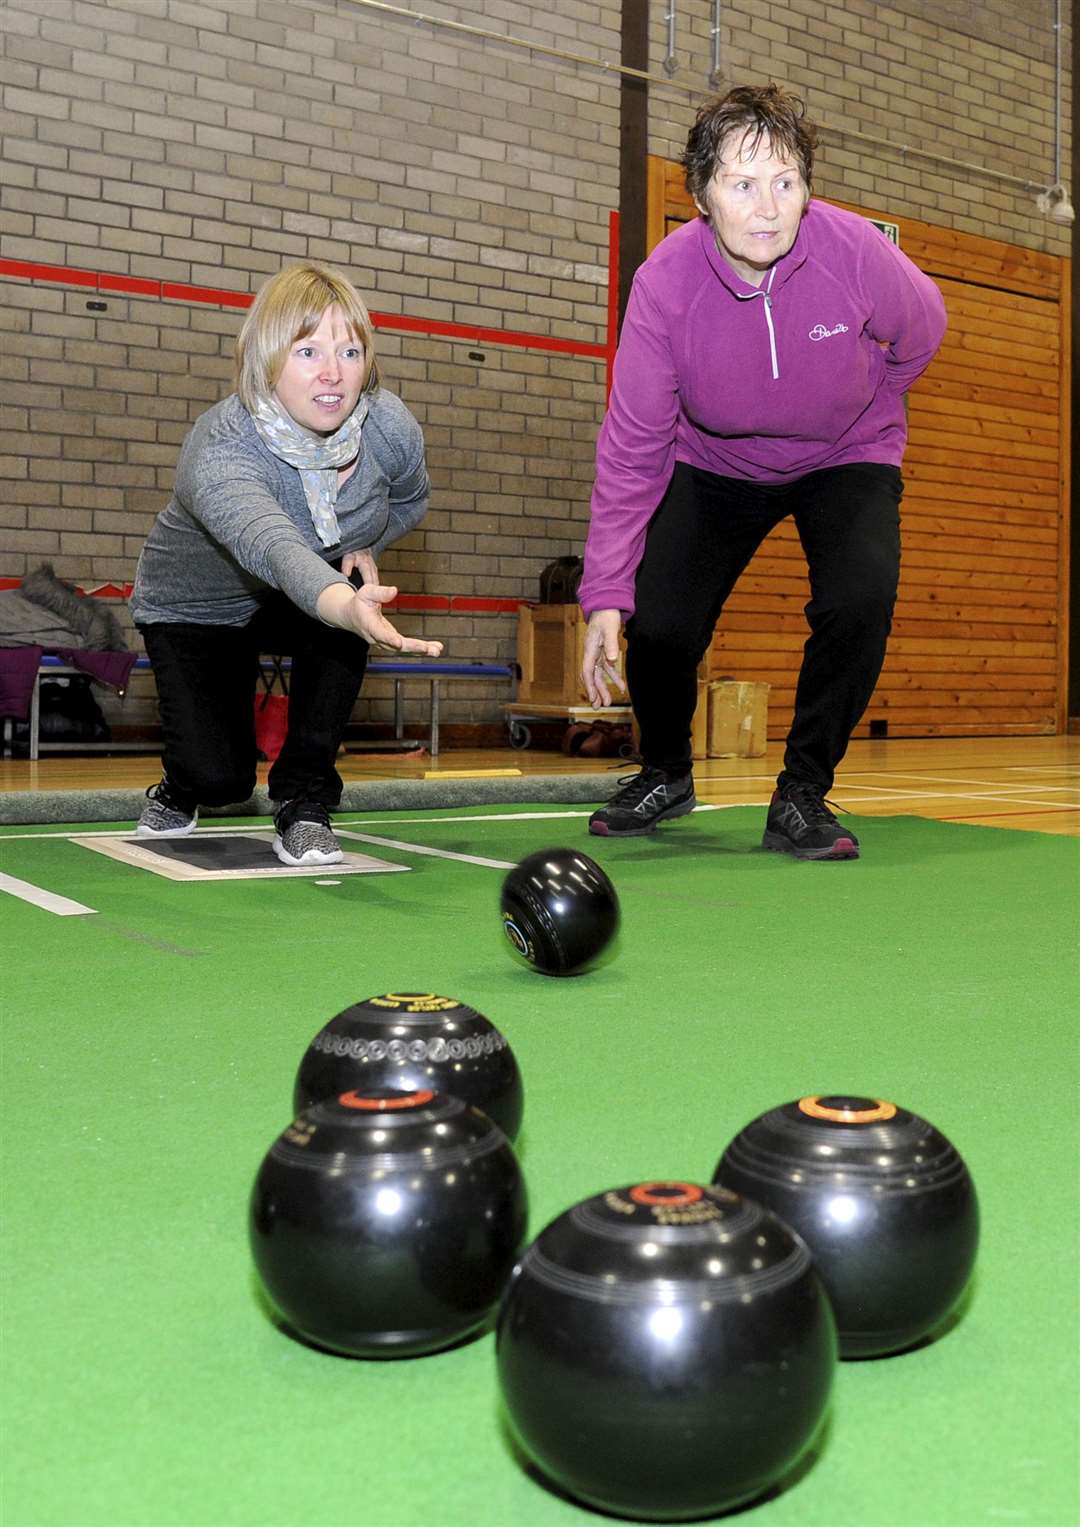 Sharon Finlay from Active Minds and cllr Lorna Cresswell taking part in the first free indoor bowling session at the community centre.